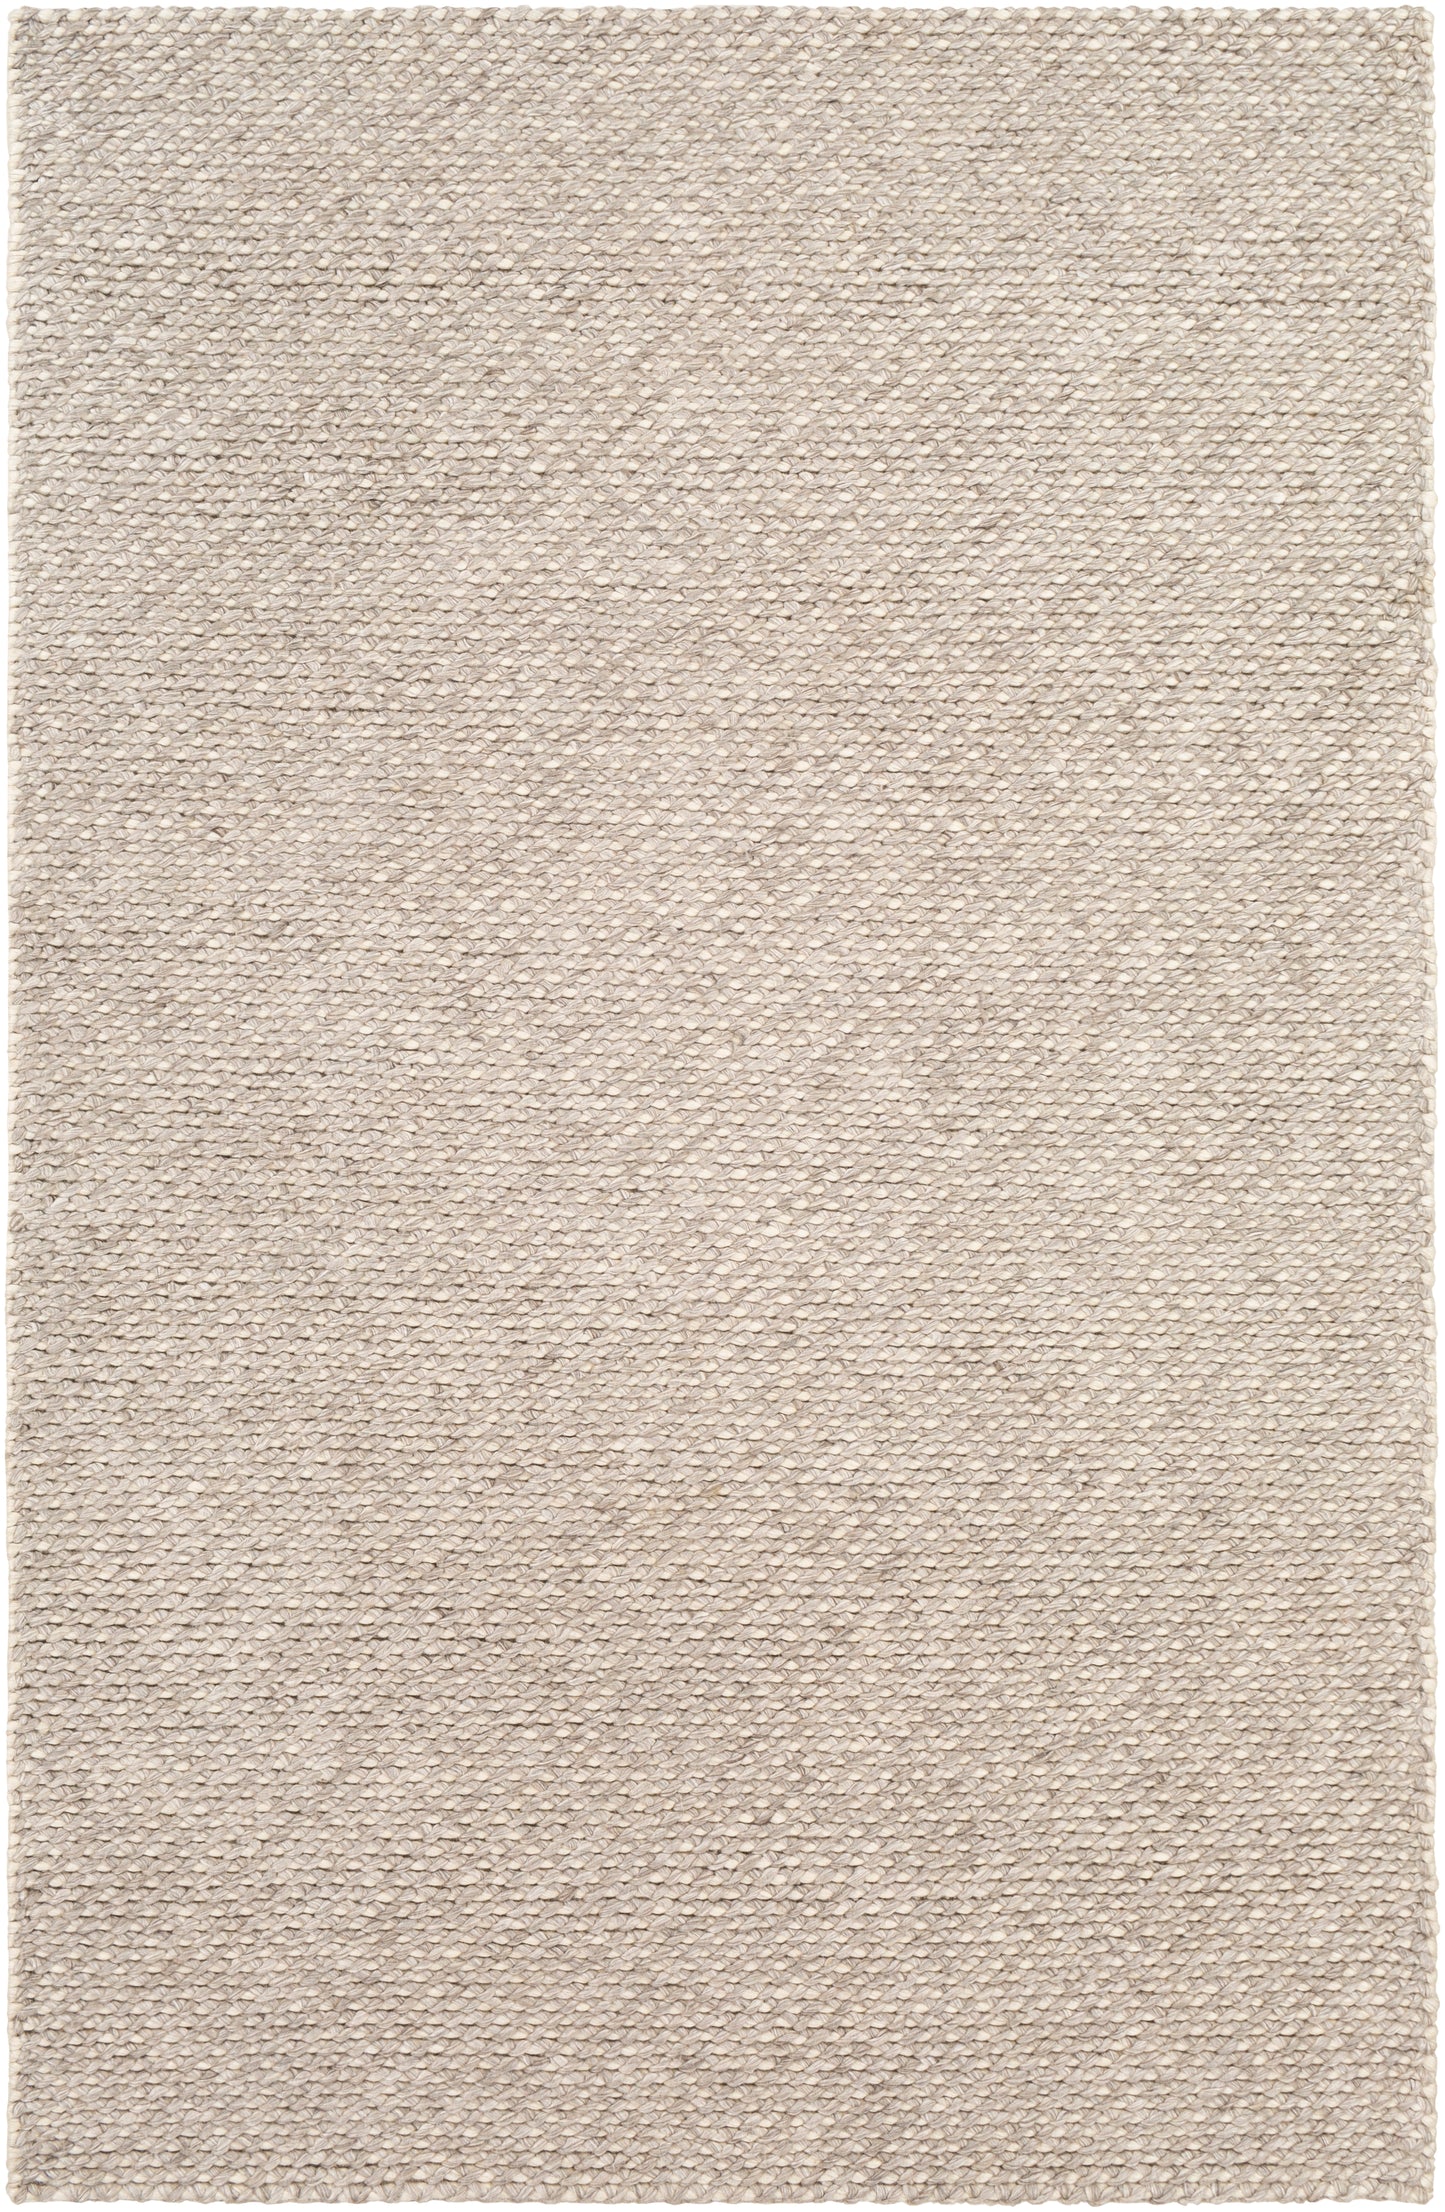 Telluride 23027 Hand Woven Synthetic Blend Indoor Area Rug by Surya Rugs